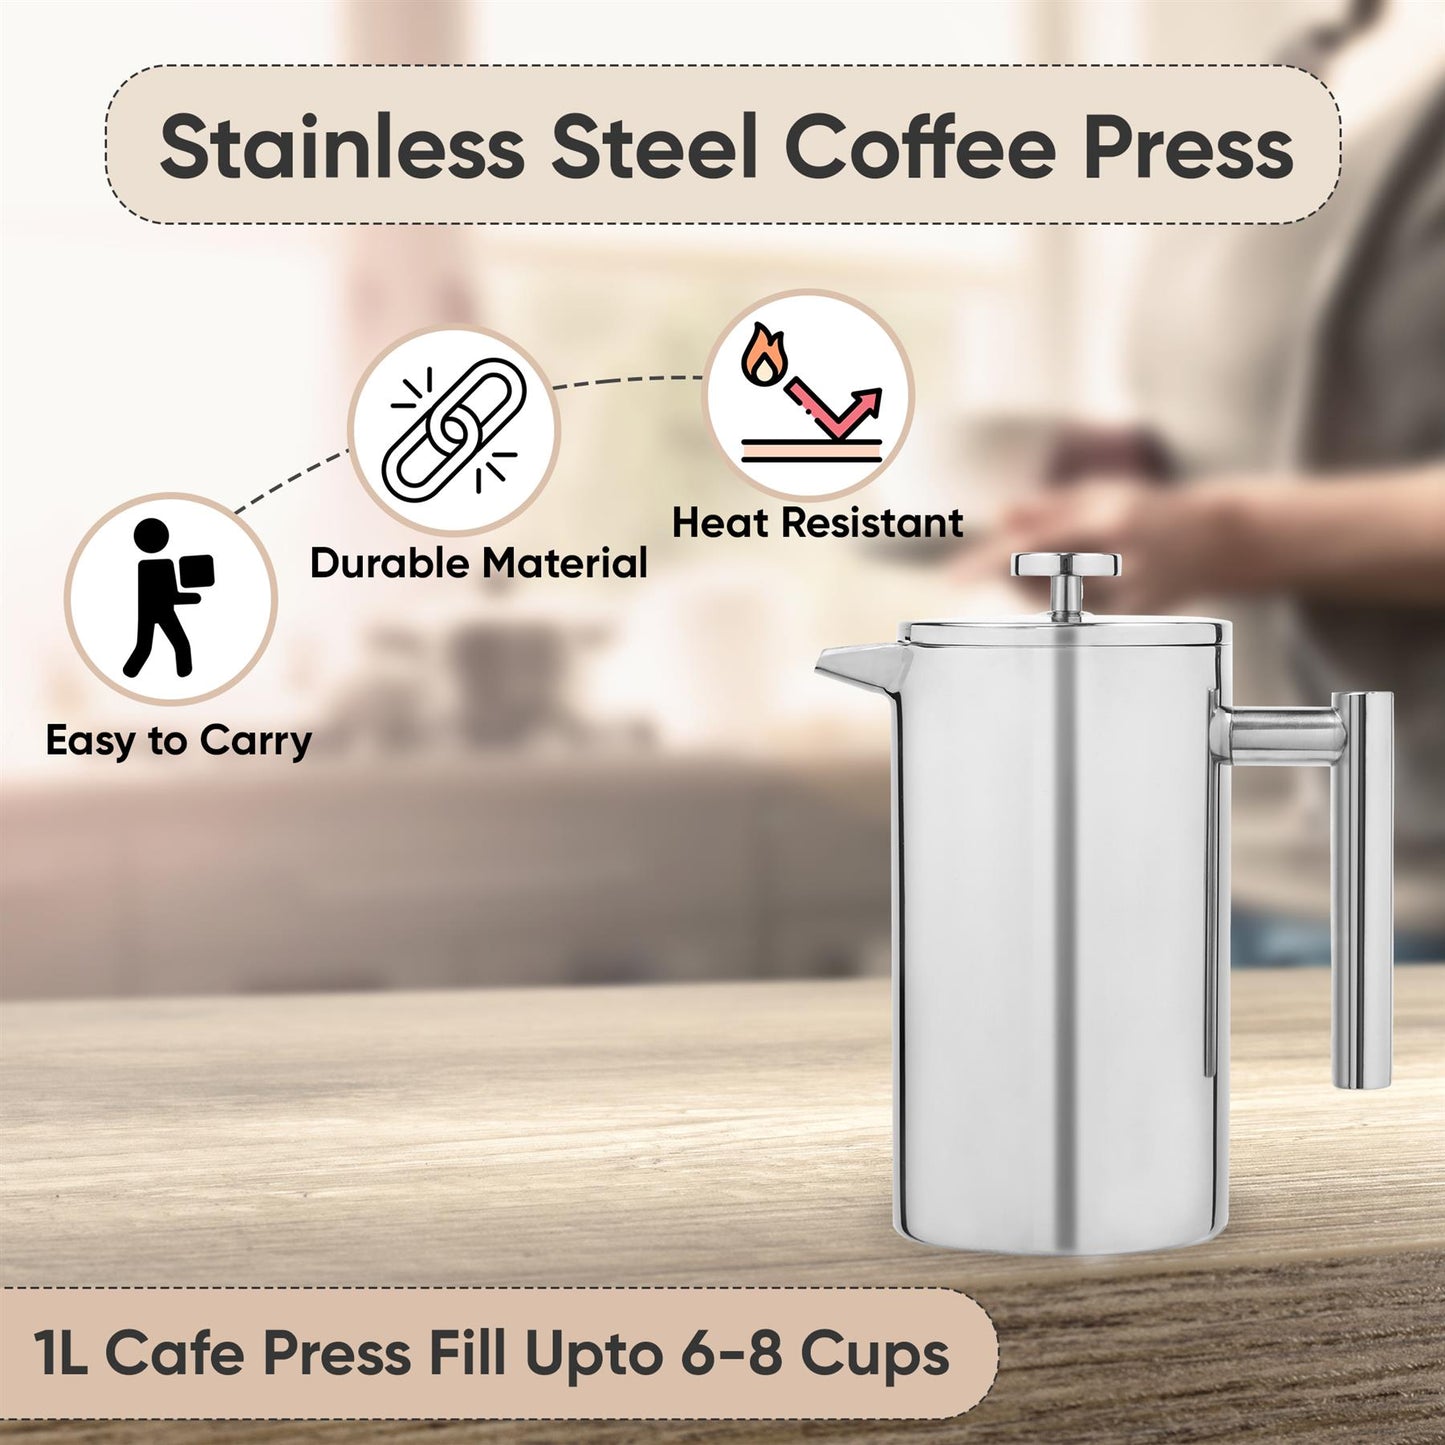 1L Stainless Steel Coffee Press Perfect Beverage Making